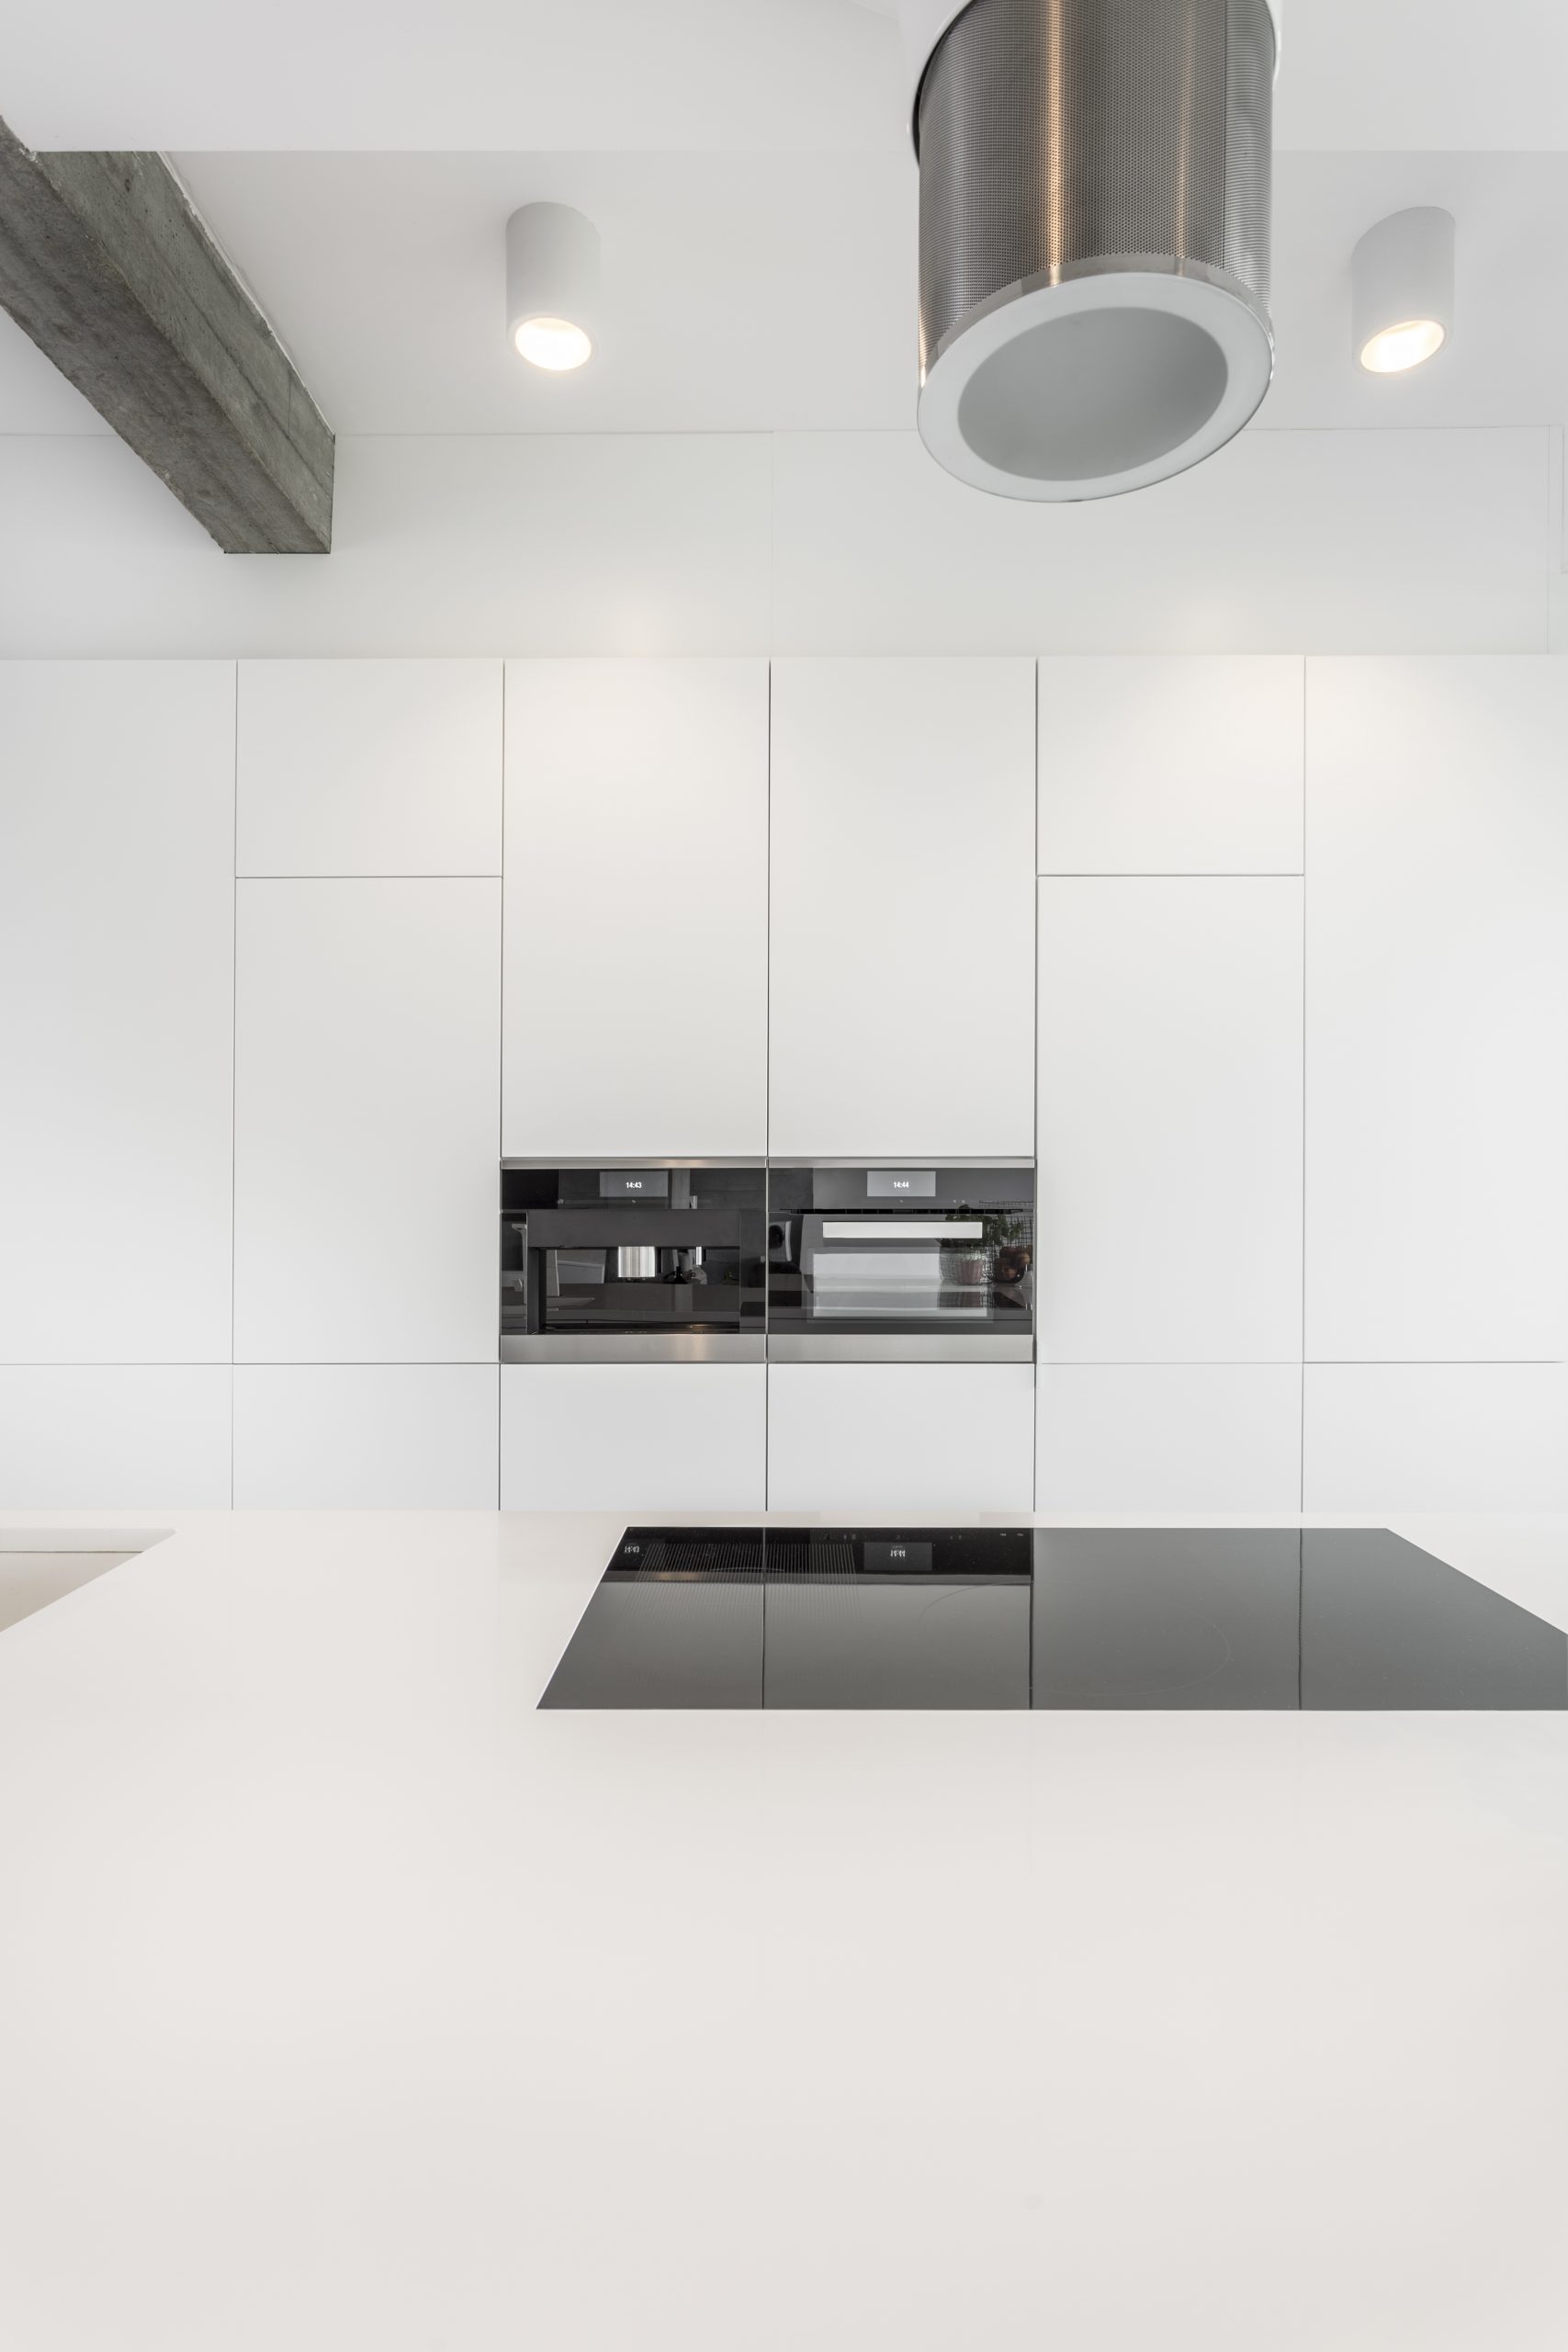 Black oven and microwave in white spacious kitchen with designed hood above glossy induction hob